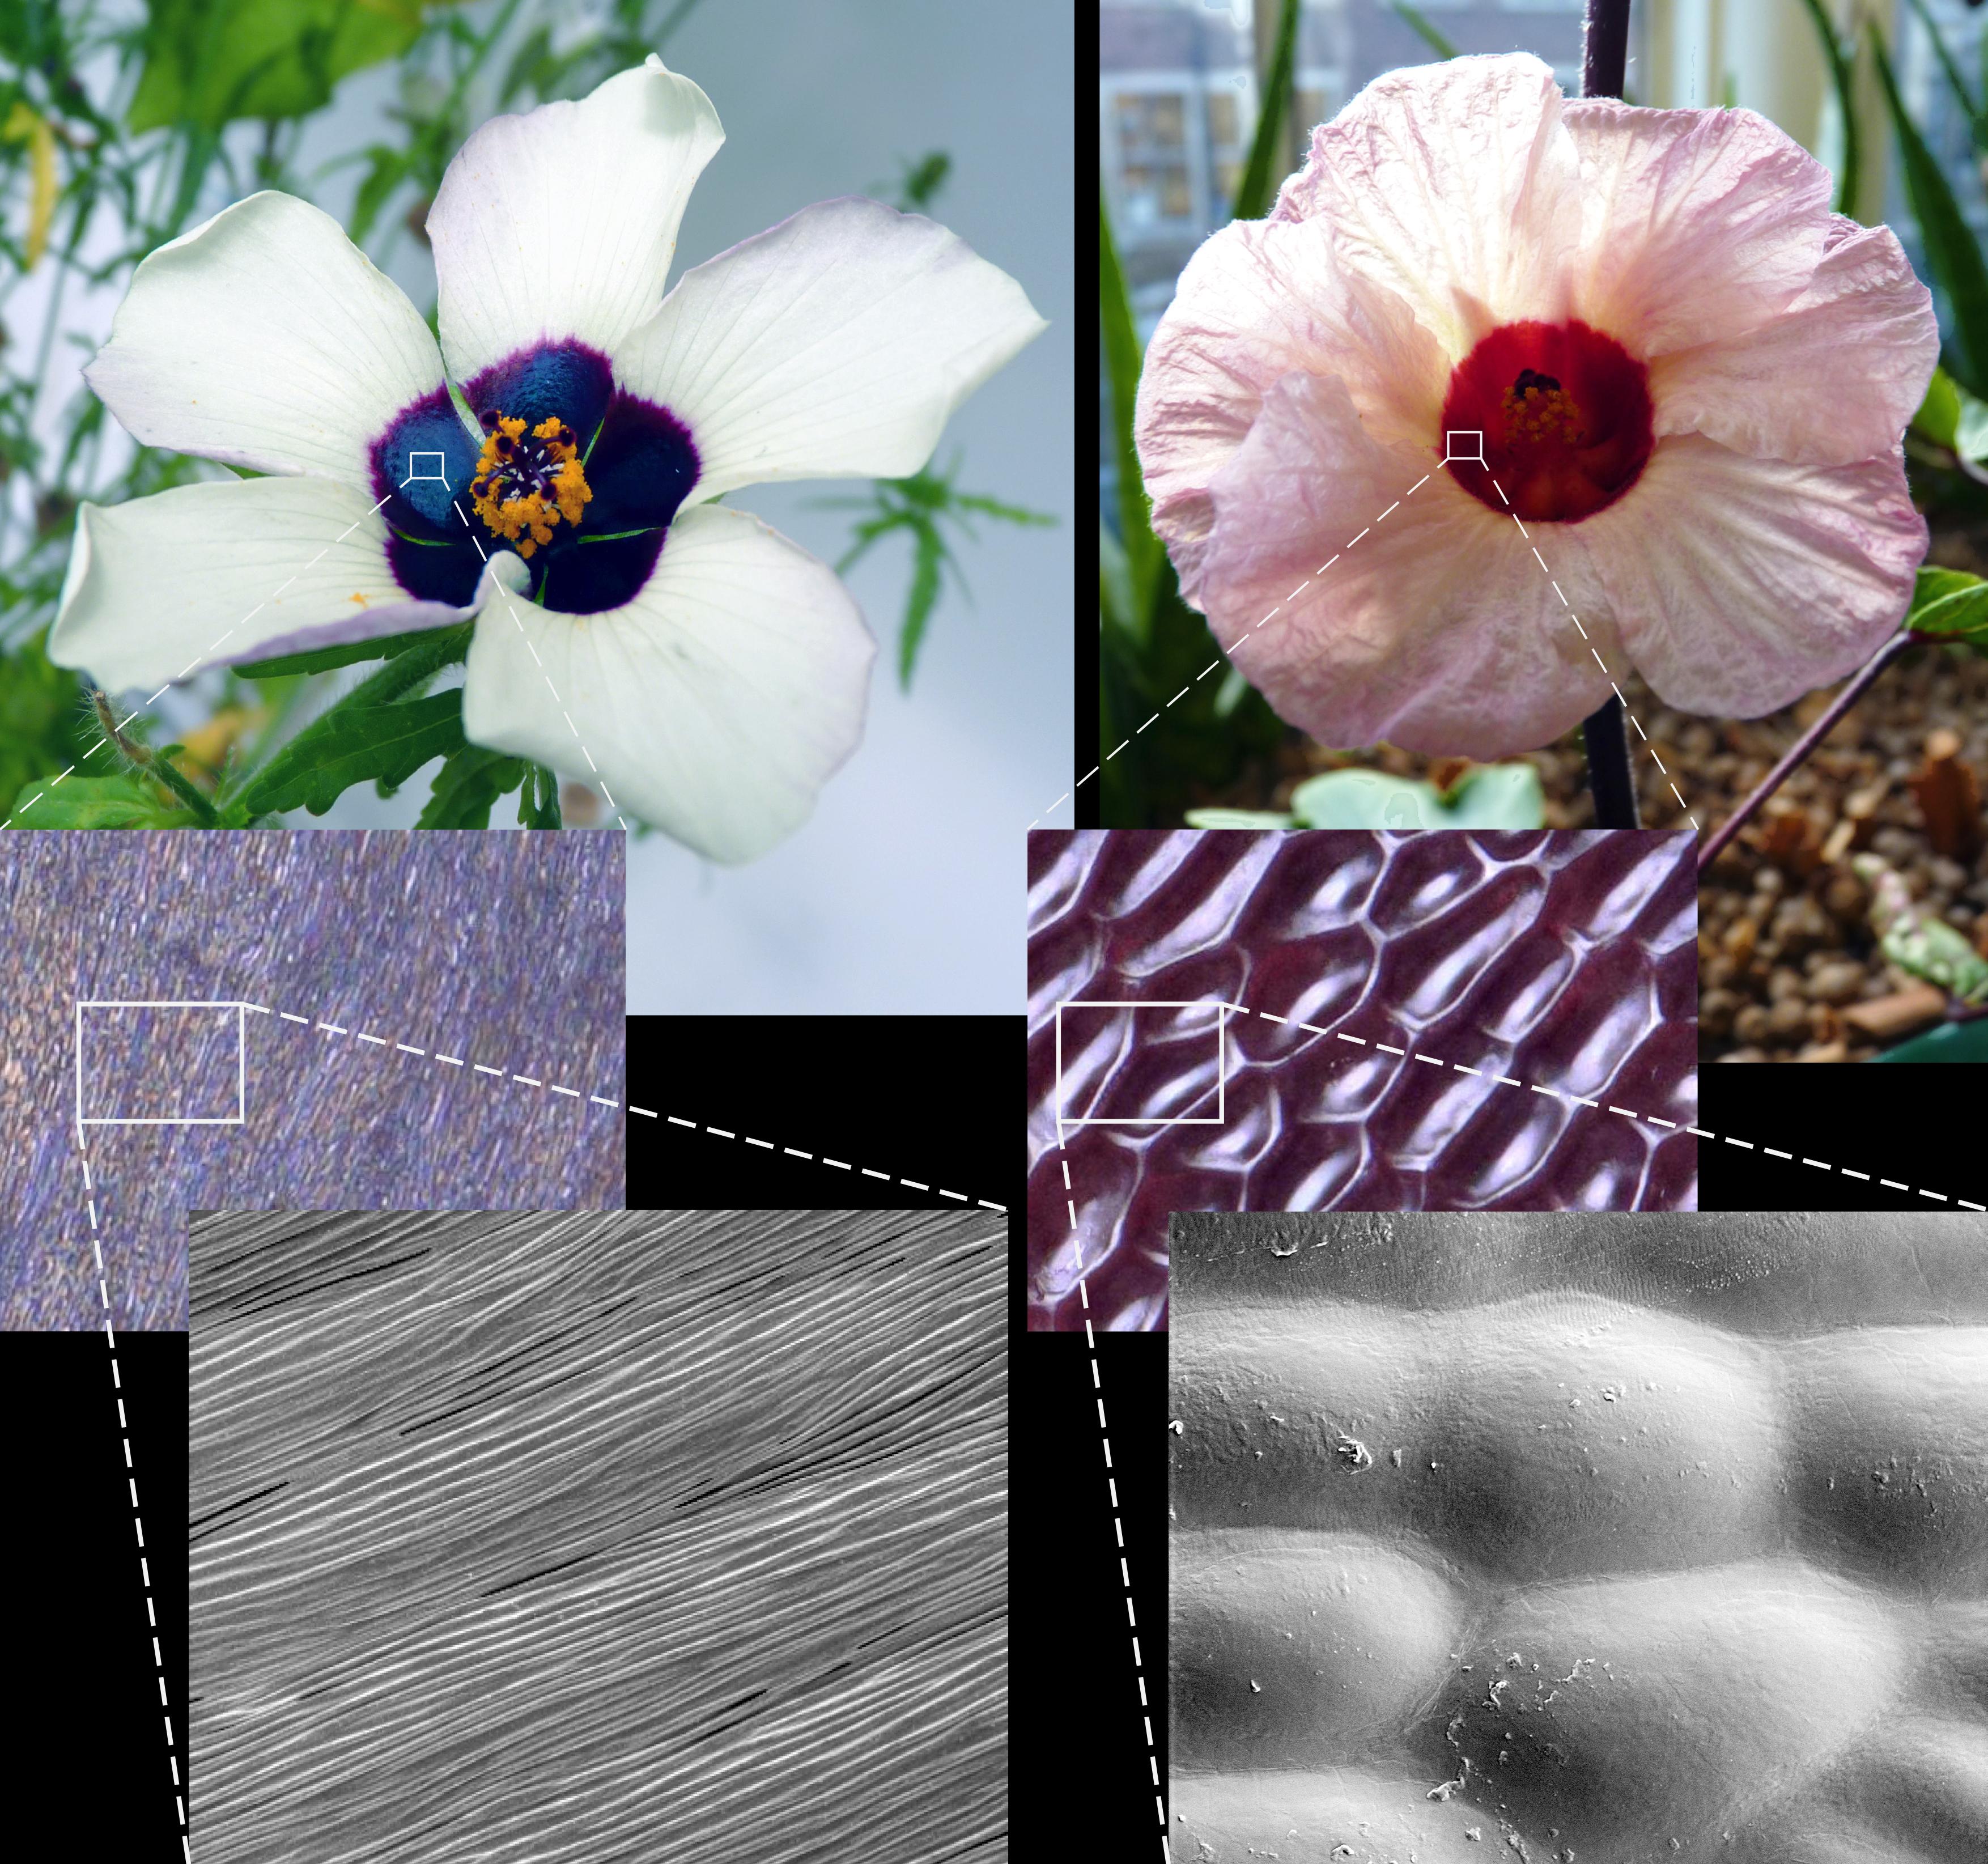 There is a clear visible difference between striated and smooth petal surfaces when the petals are viewed under microscopes: Hibiscus trionum (left) has microscopic ridges on its petal surface that act as diffraction gratings to reflect light, while Hibis